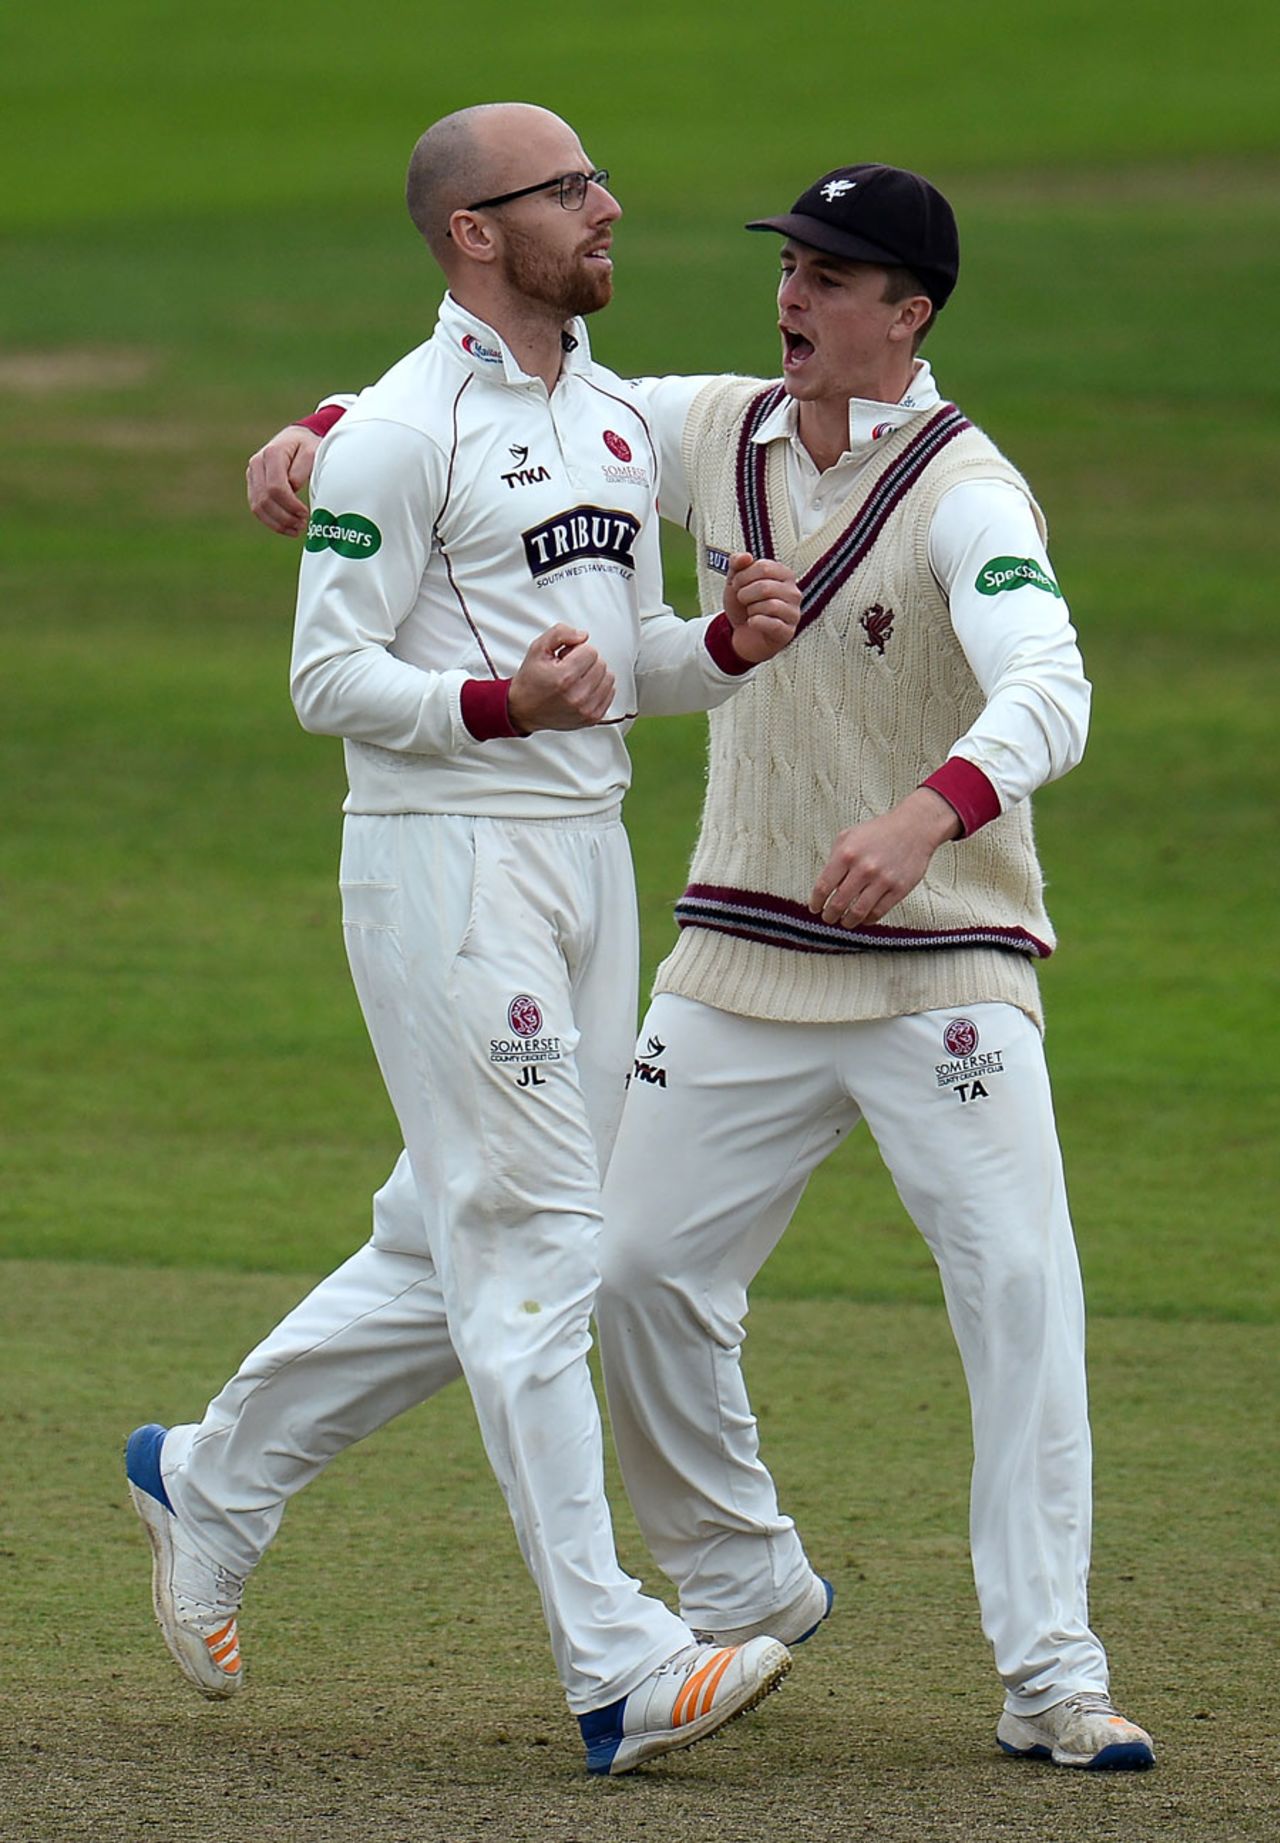 Jack Leach gets a hug from his captain, Tom Abell, Somerset v Middlesex, Specsavers Championship Division One, Taunton, September 27, 2017